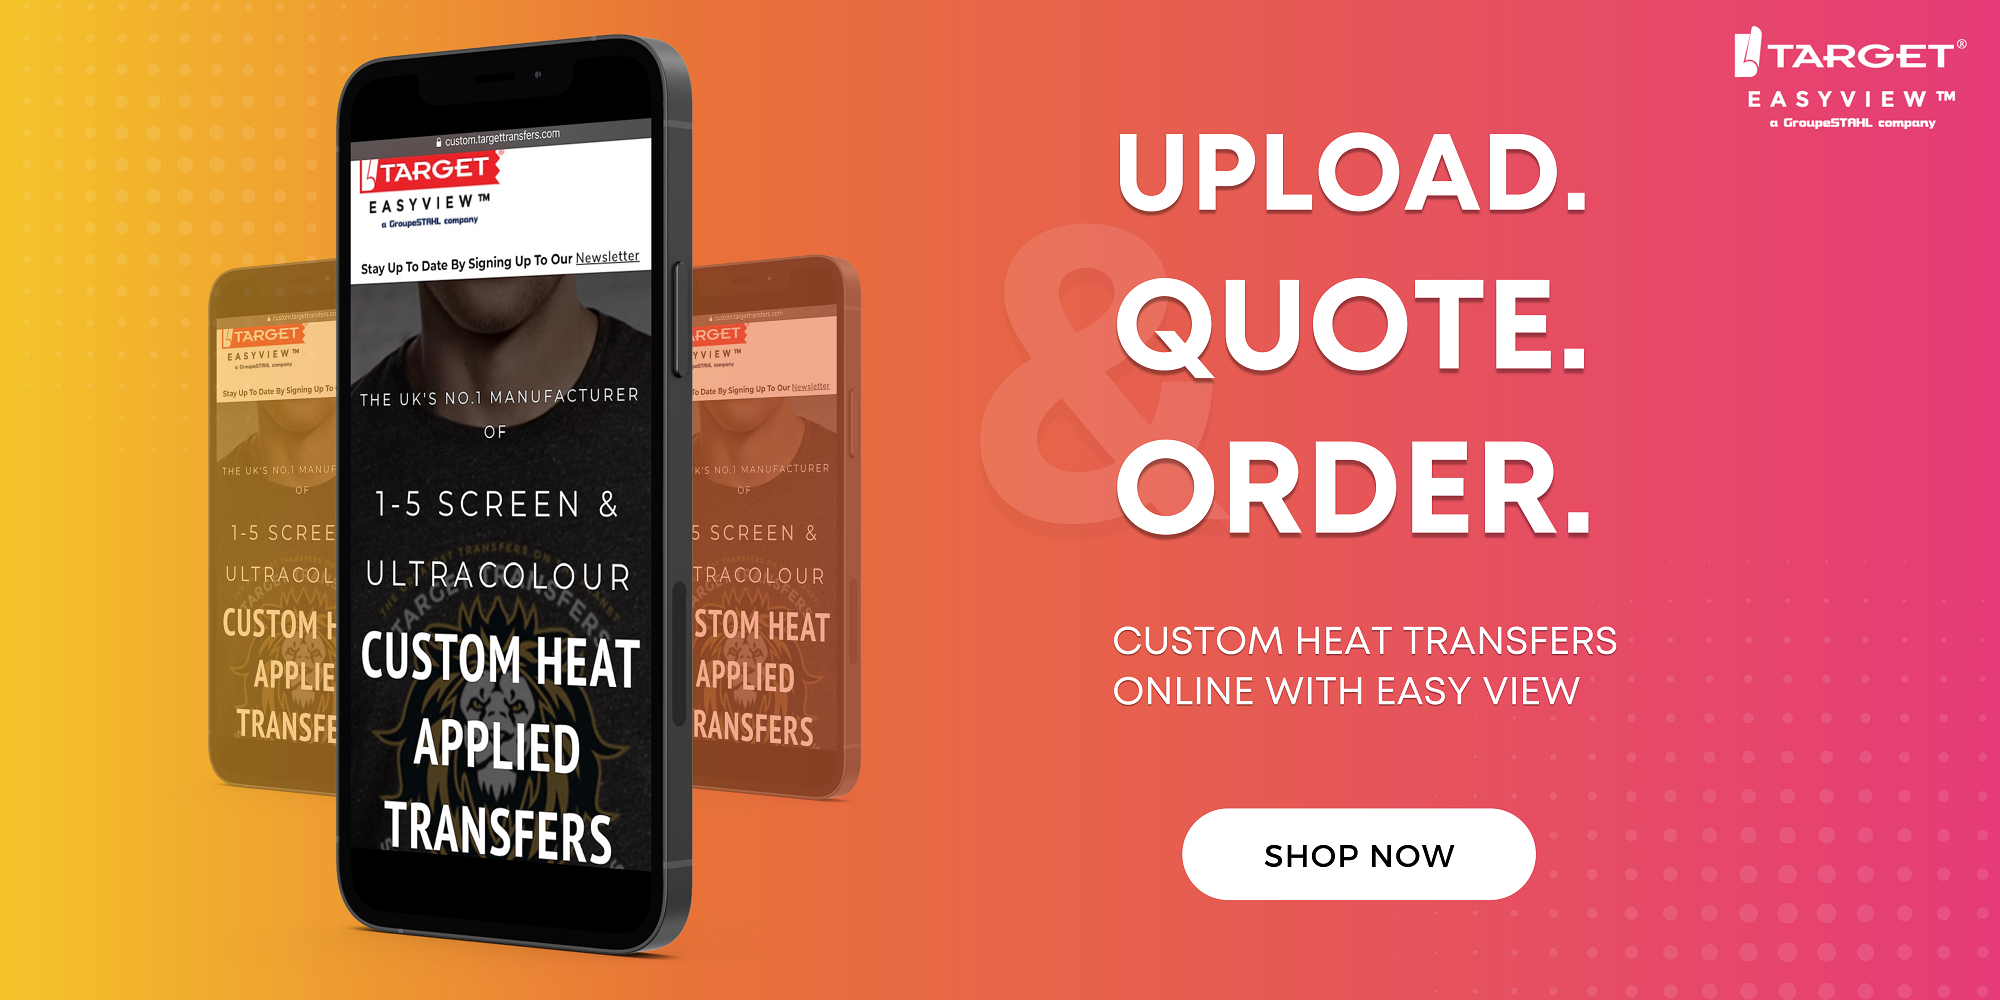 Order Custom Heat Transfers Online 24/7 with Easy View